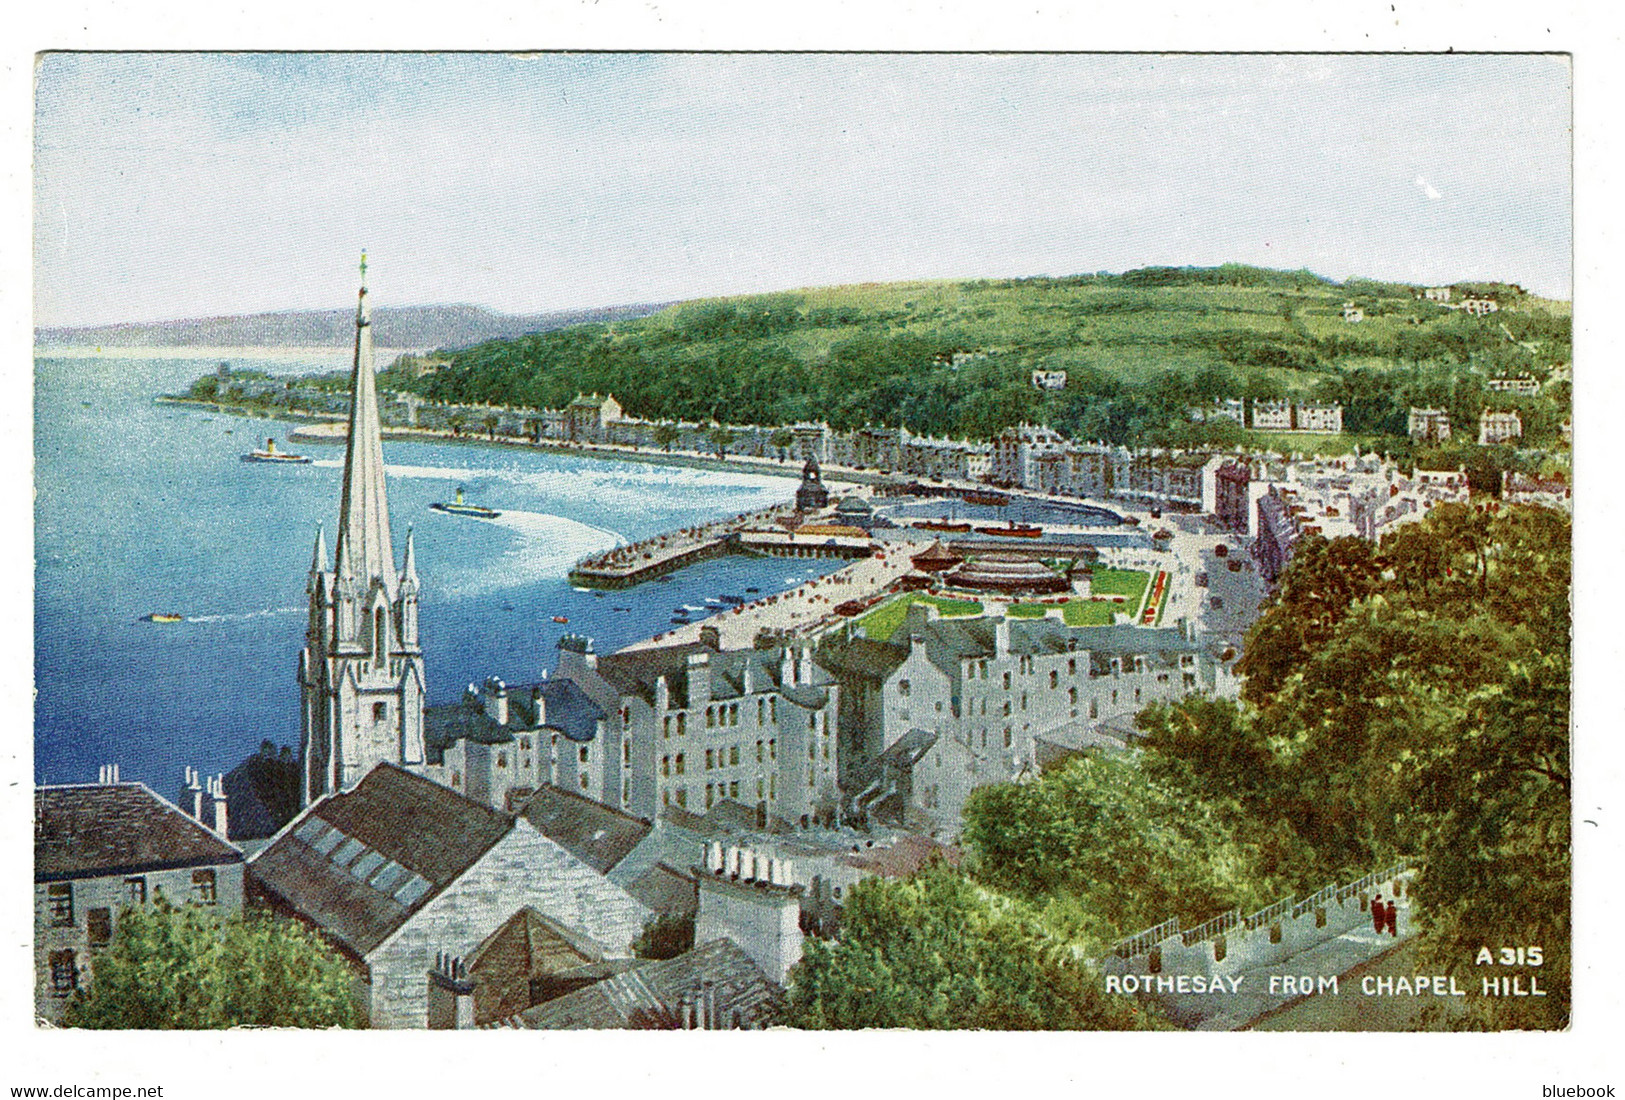 Ref 1440 - Early Postcard - Rothesay From Chapel Hill - Isle Of Bute Scotland - Bute